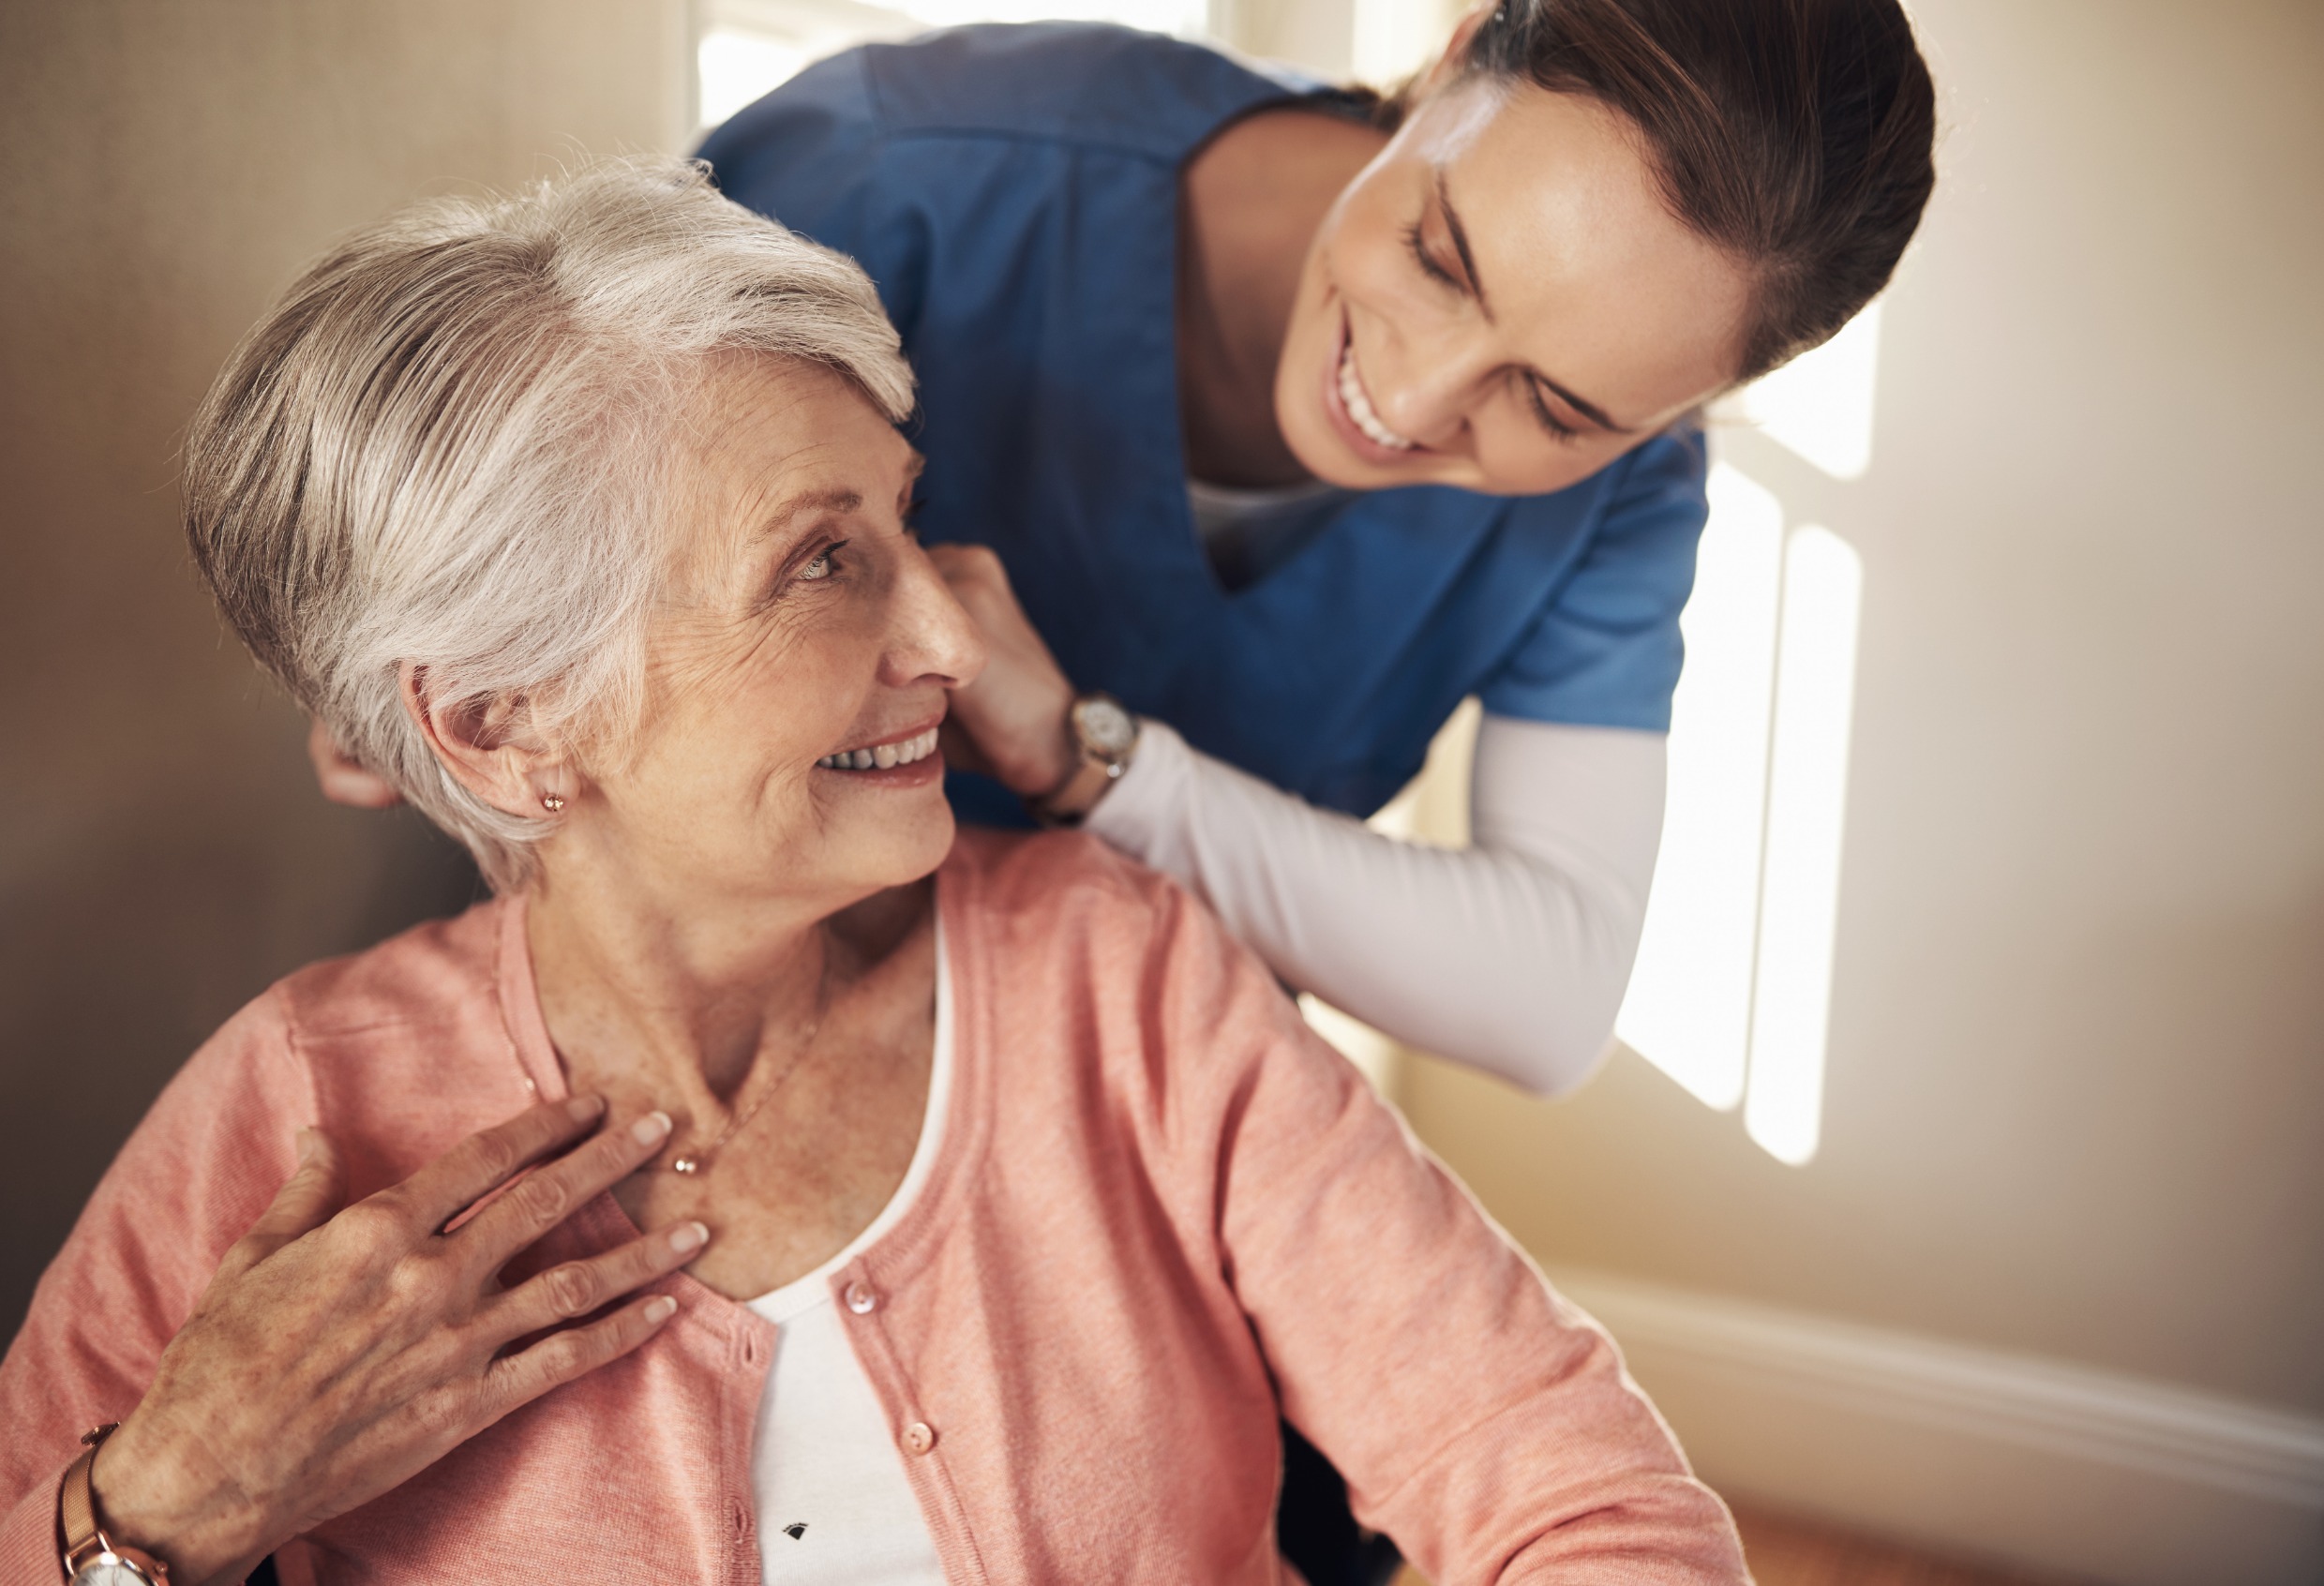 Home Care Agencies Versus Nurse Registries: Know the Difference